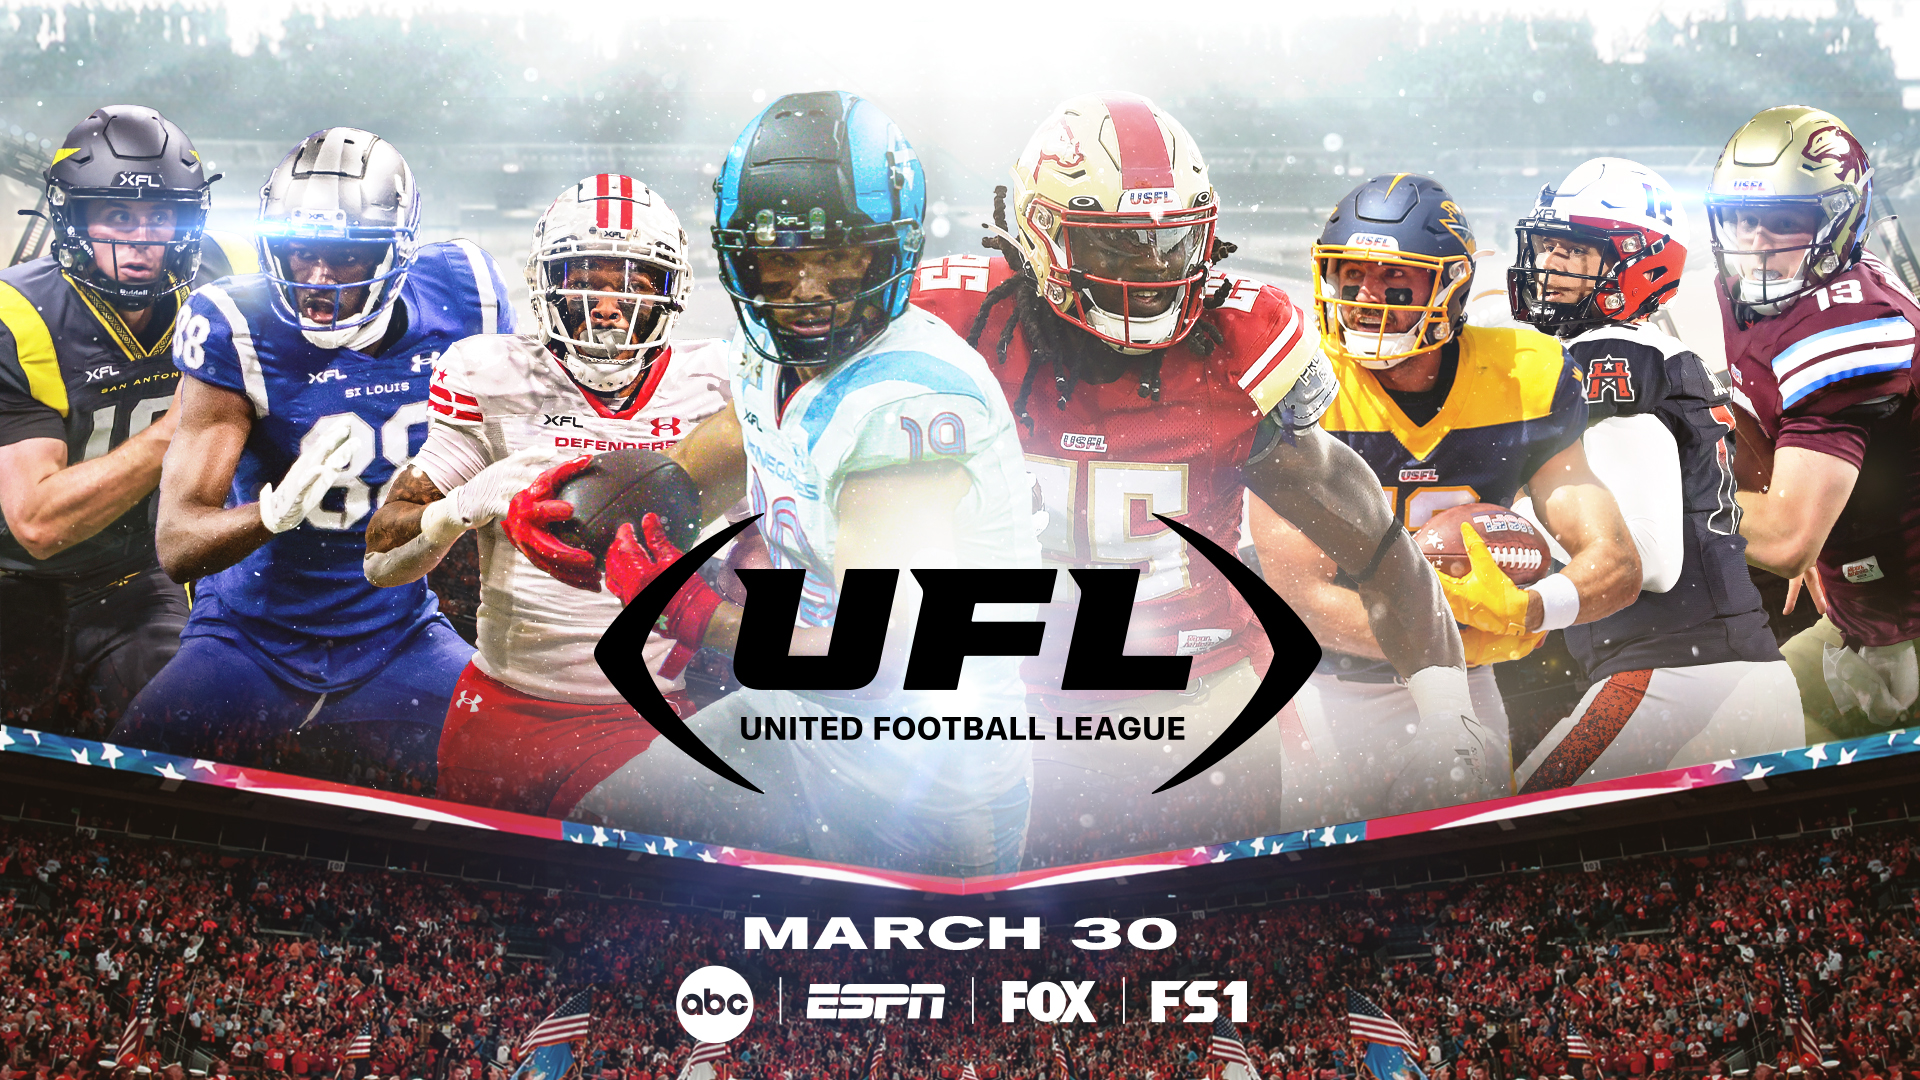 UNITED FOOTBALL LEAGUE ANNOUNCES INITIAL ROSTER INFORMATION